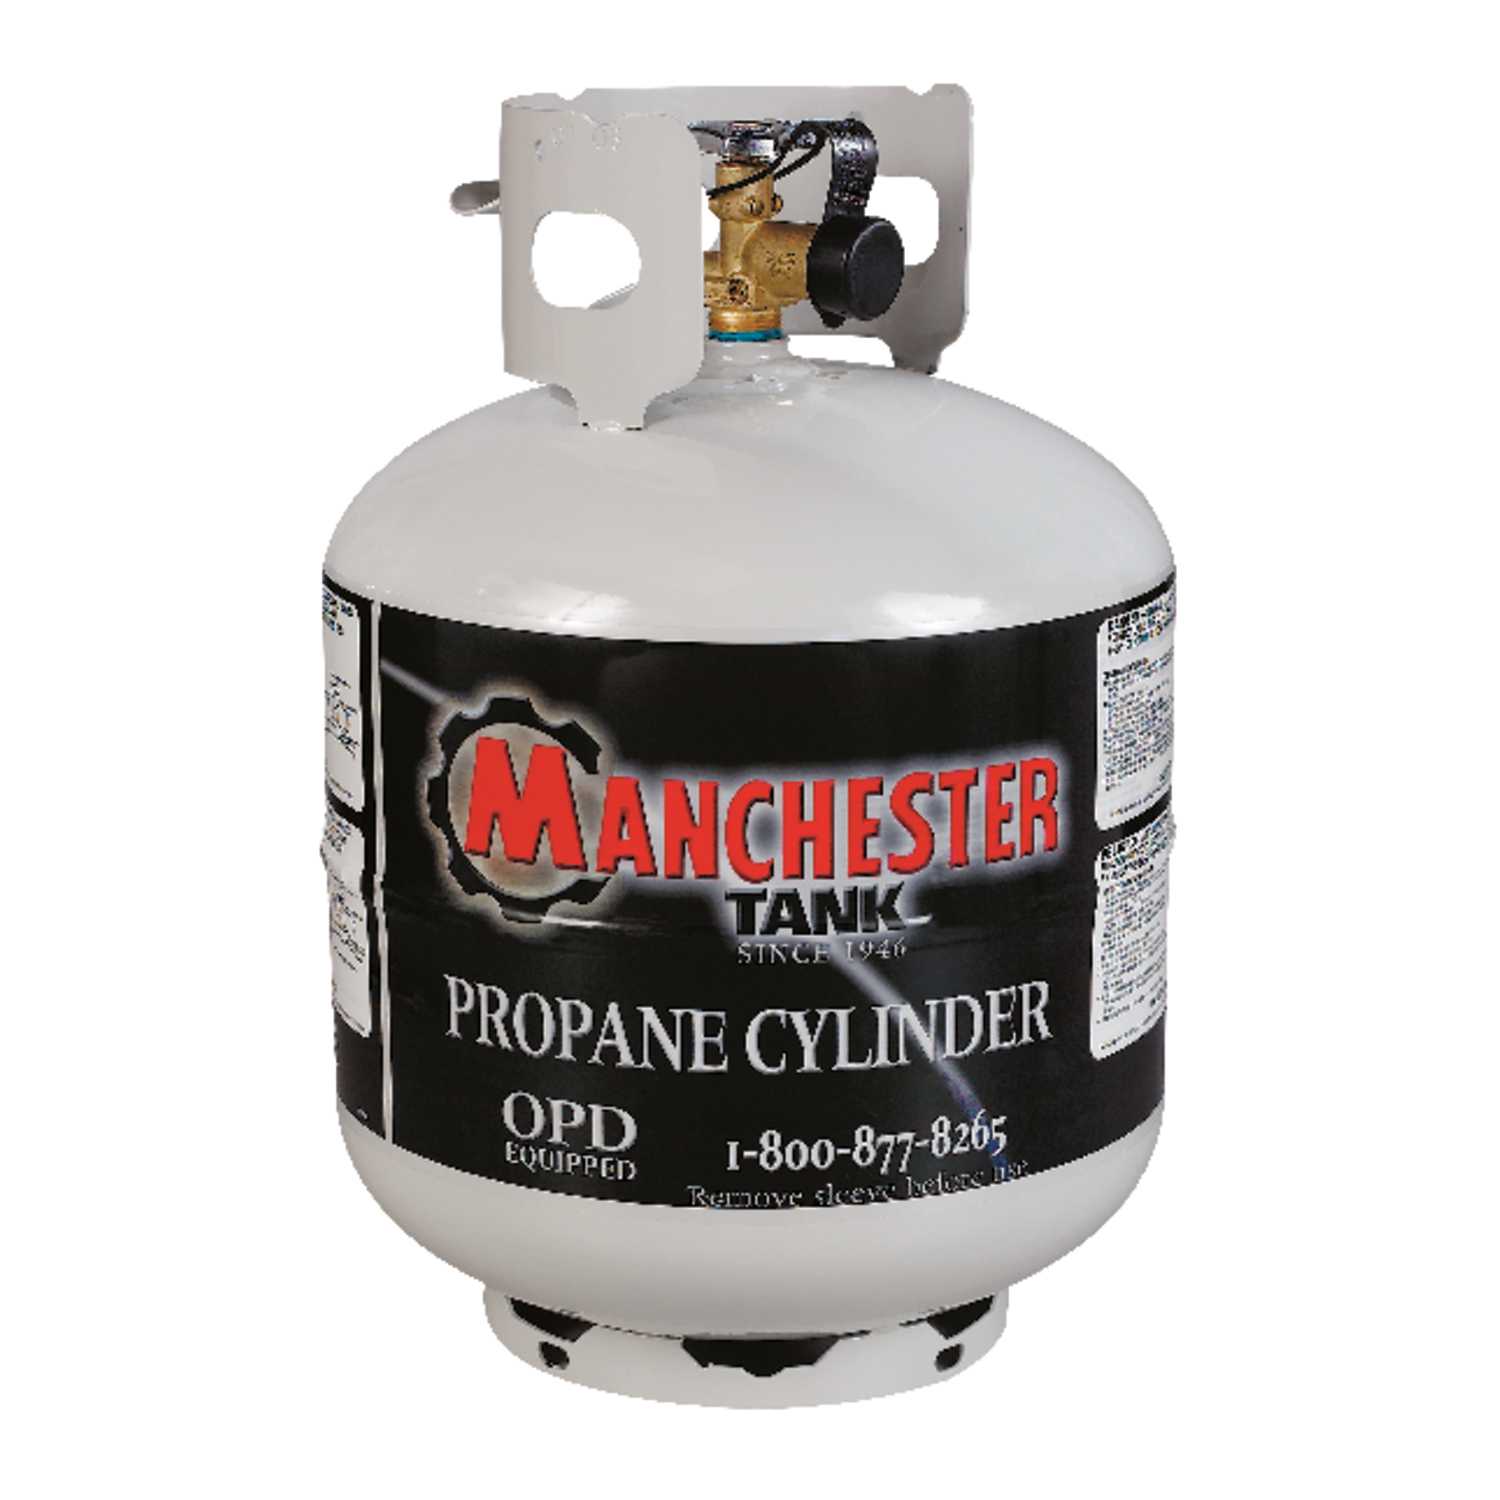 Propane Cylinders and Accessories